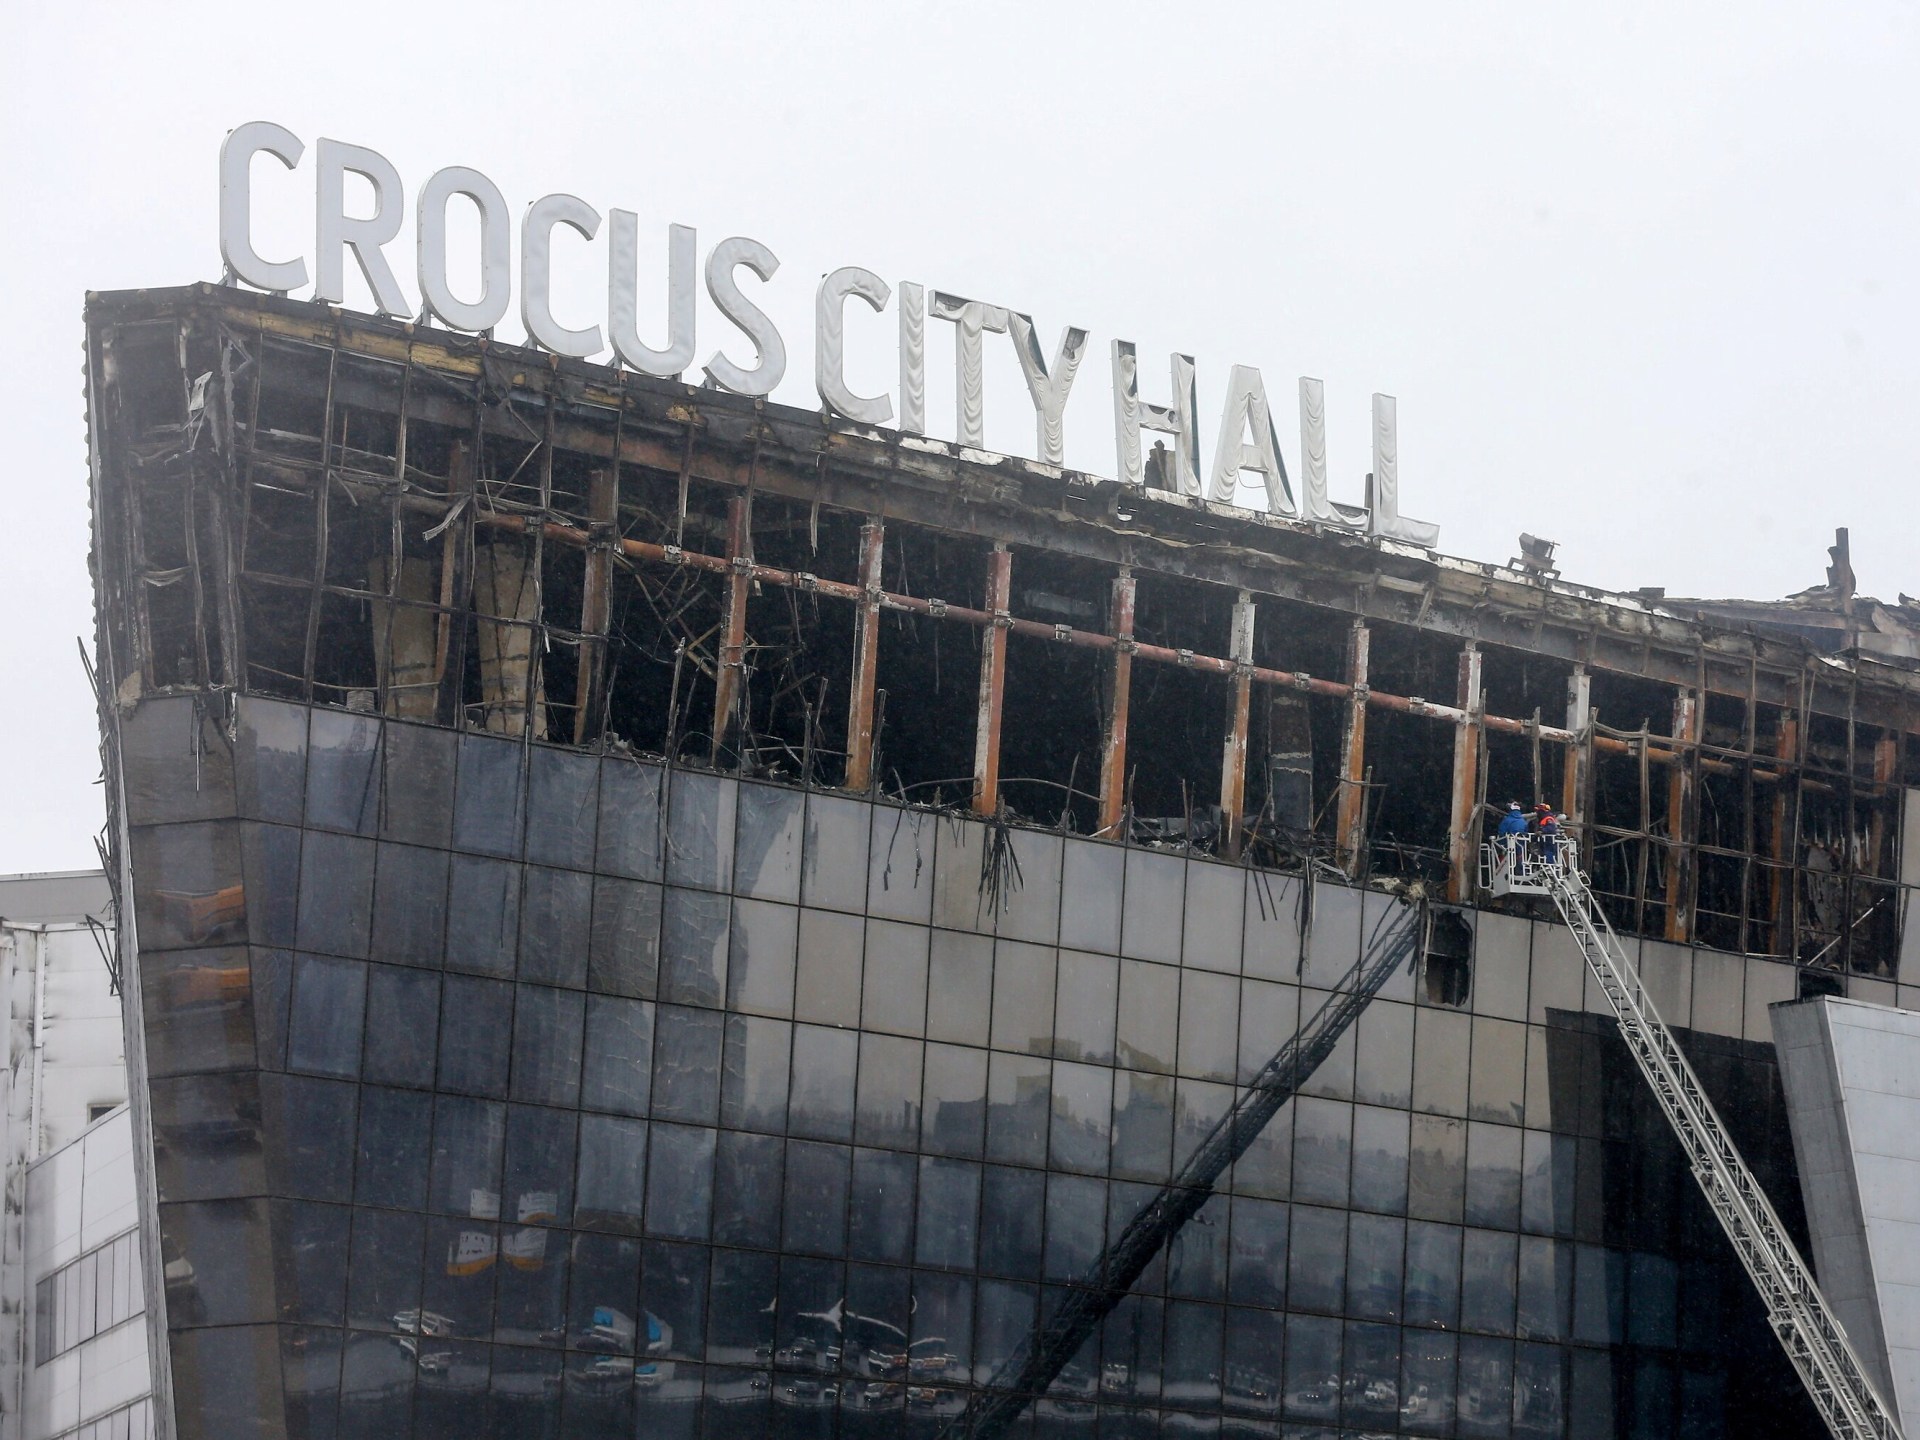 Moscow concert hall attack: Why is ISIL targeting Russia?  | ISIL/ISIS News